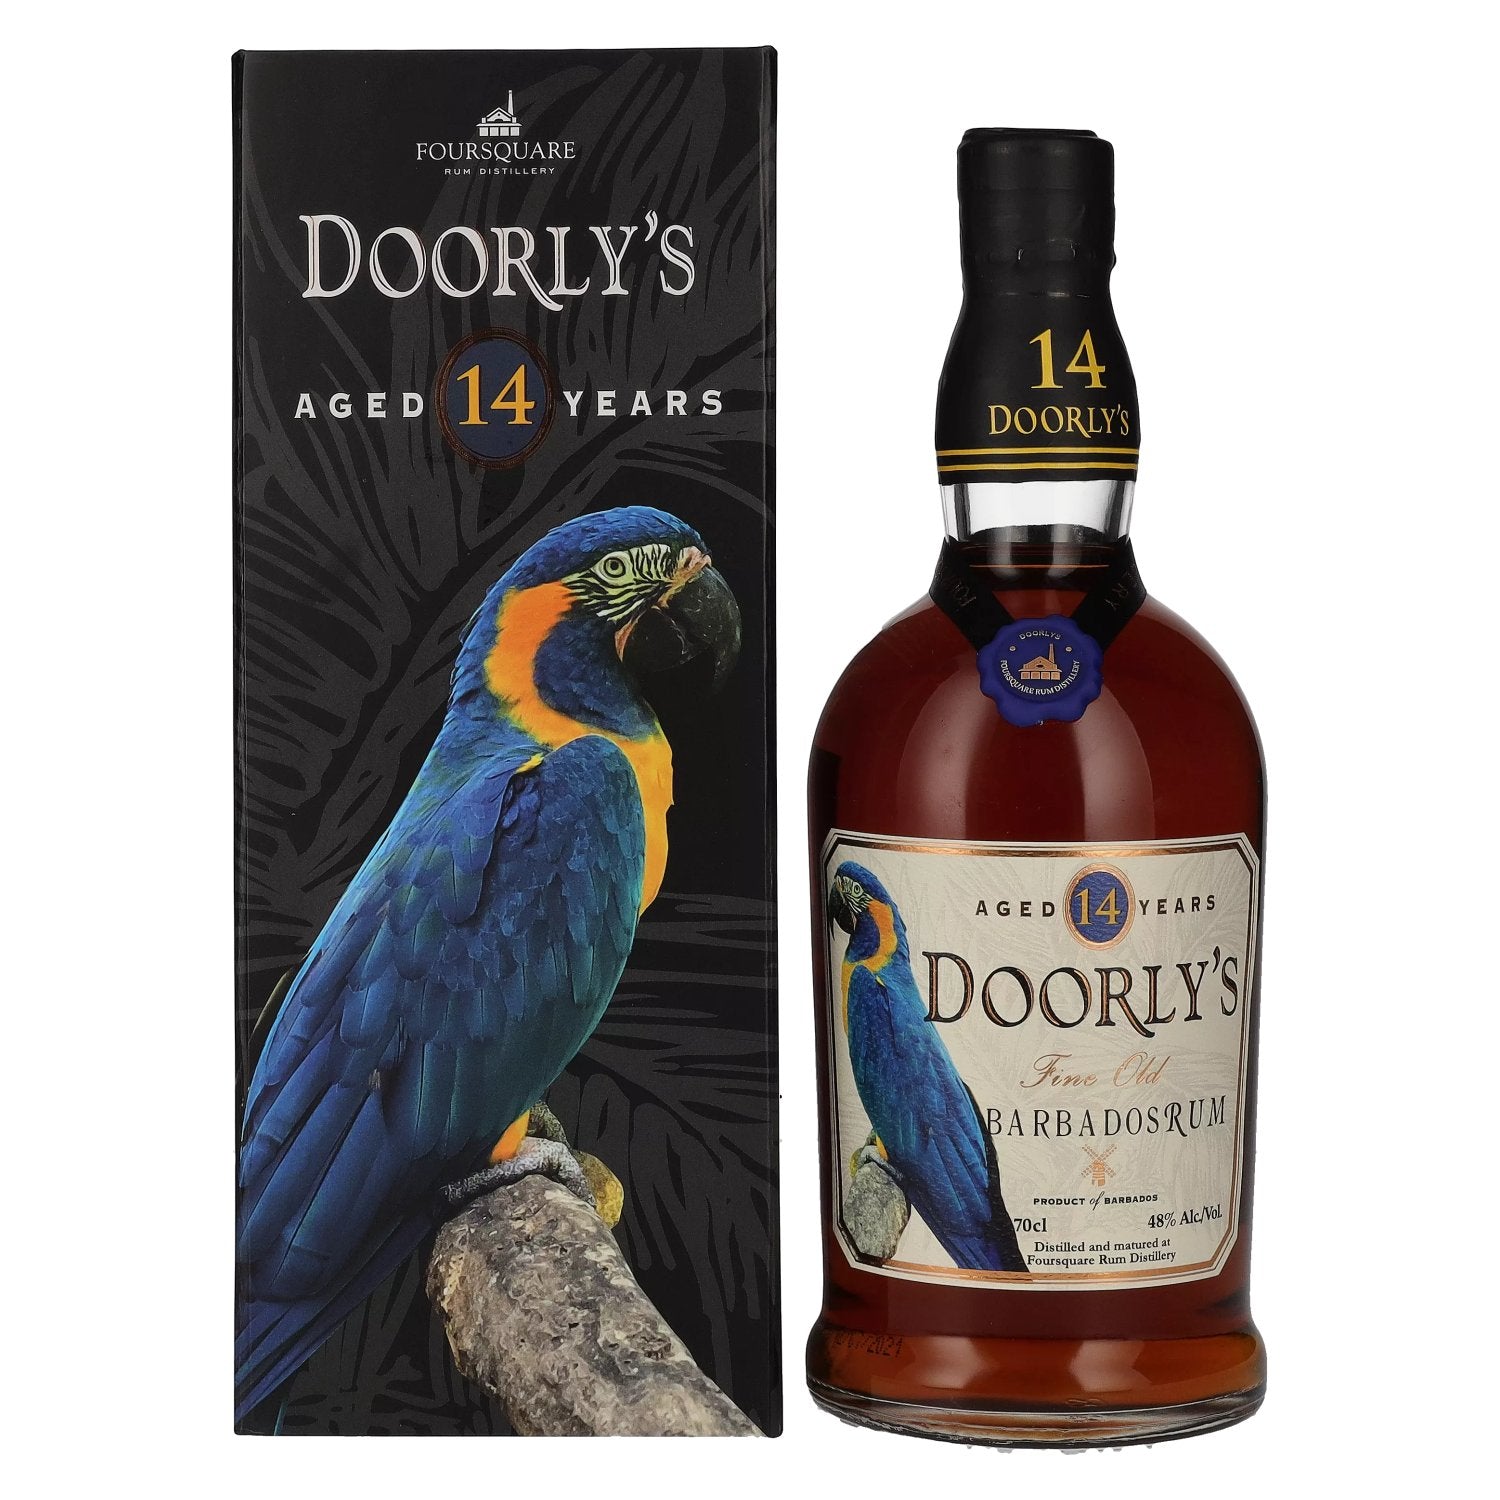 Doorly's 14 Years Old Fine Old Barbados Rum 48% Vol. 0,7l in Giftbox